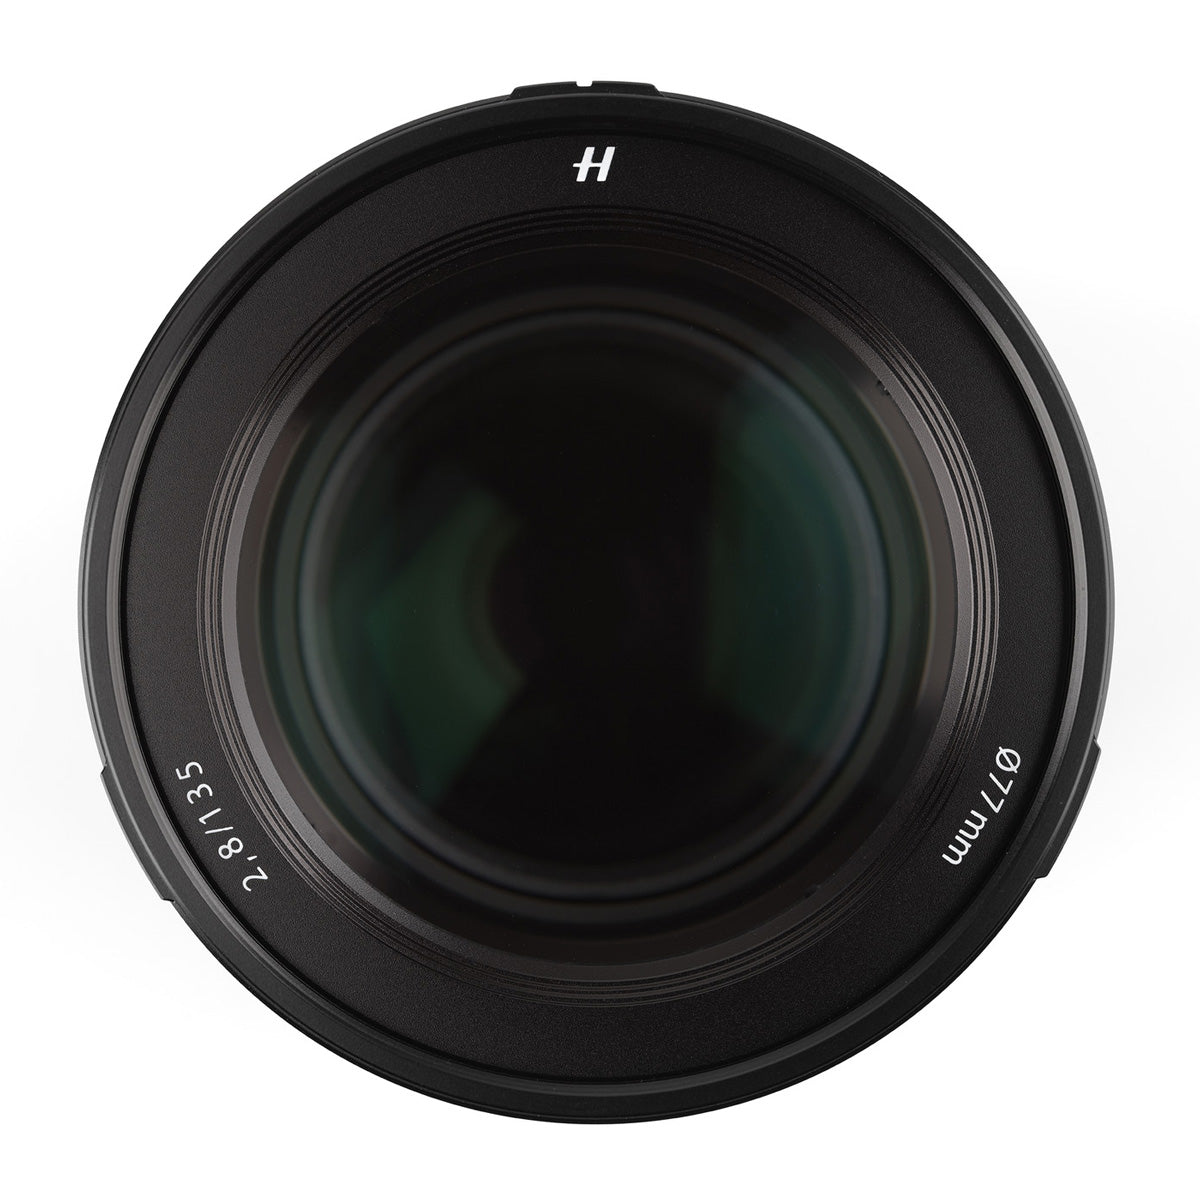 Hasselblad XCD 135mm f2.8 lens with X 1.7 teleconverter